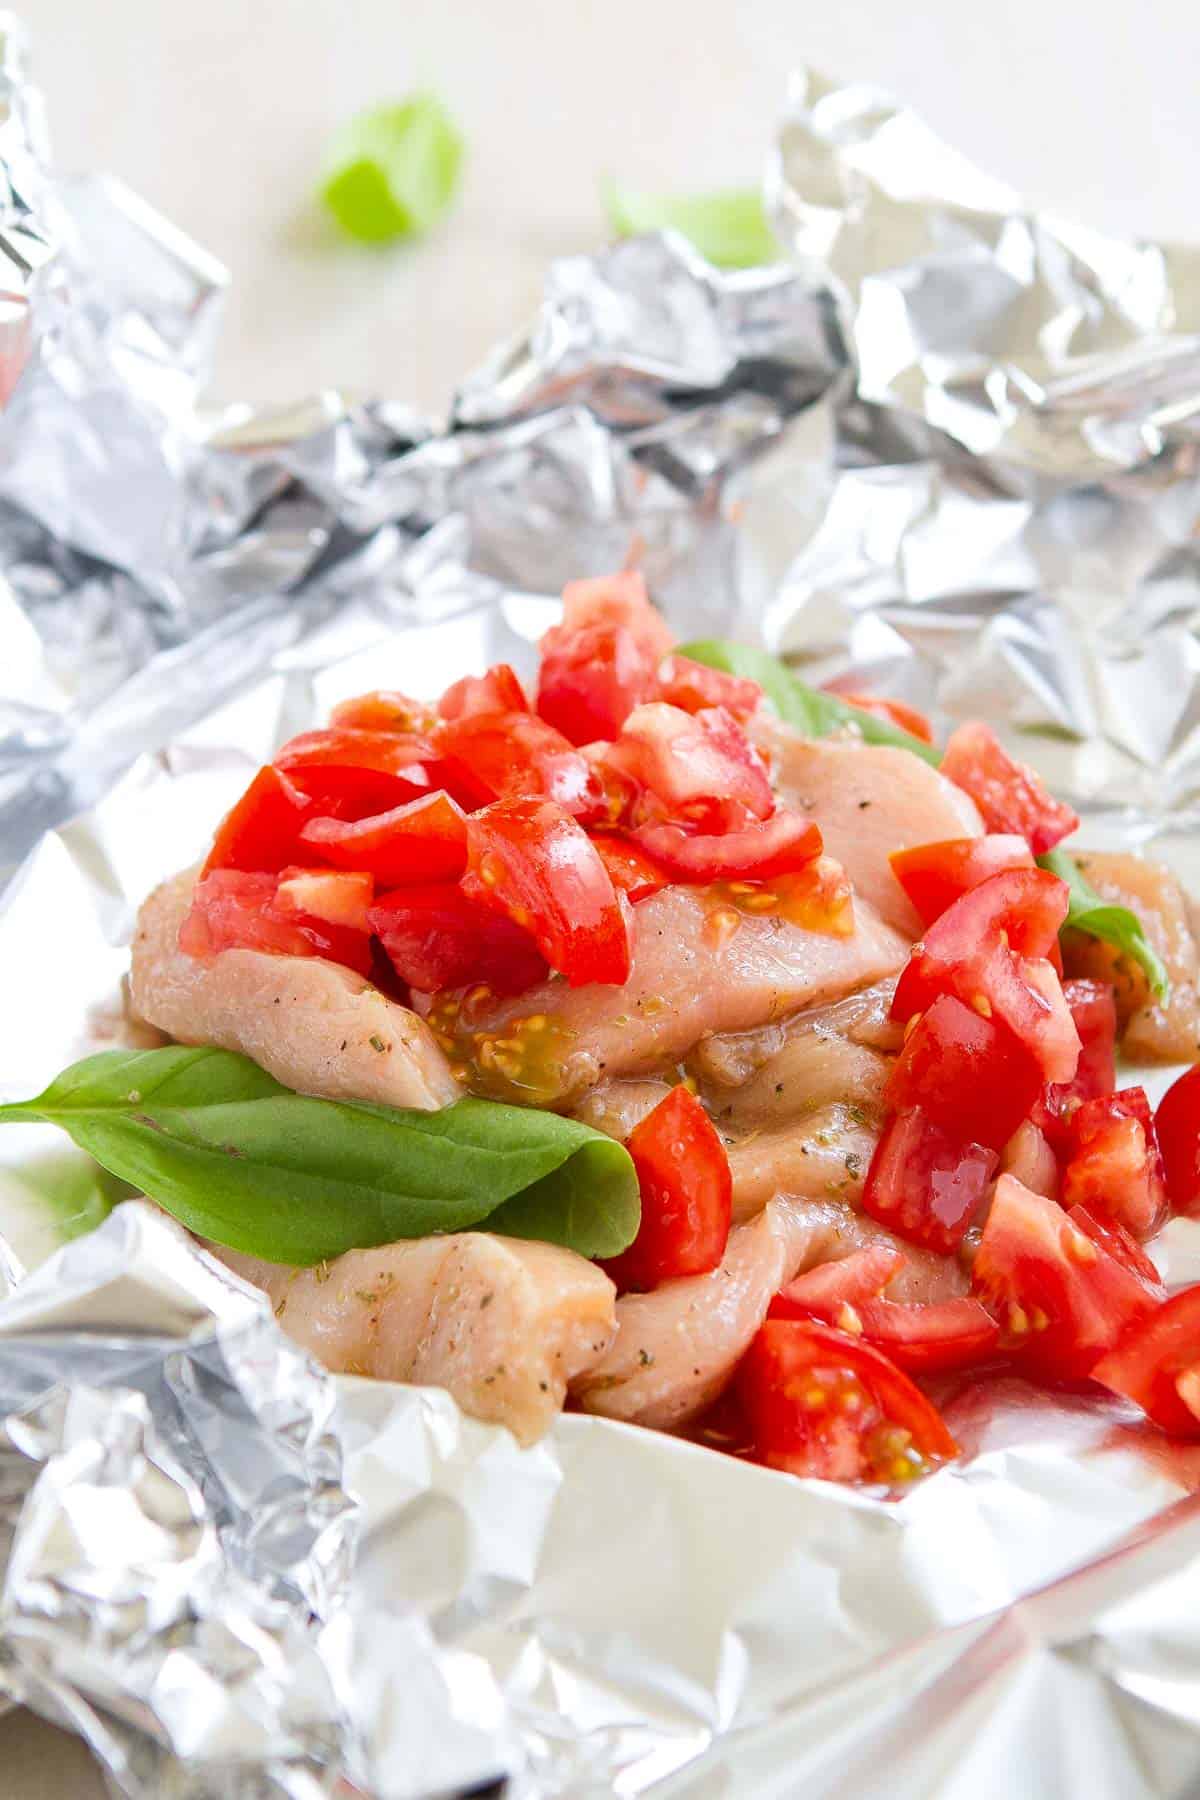 Sliced chicken breast, tomatoes and basil on a sheet of foil.